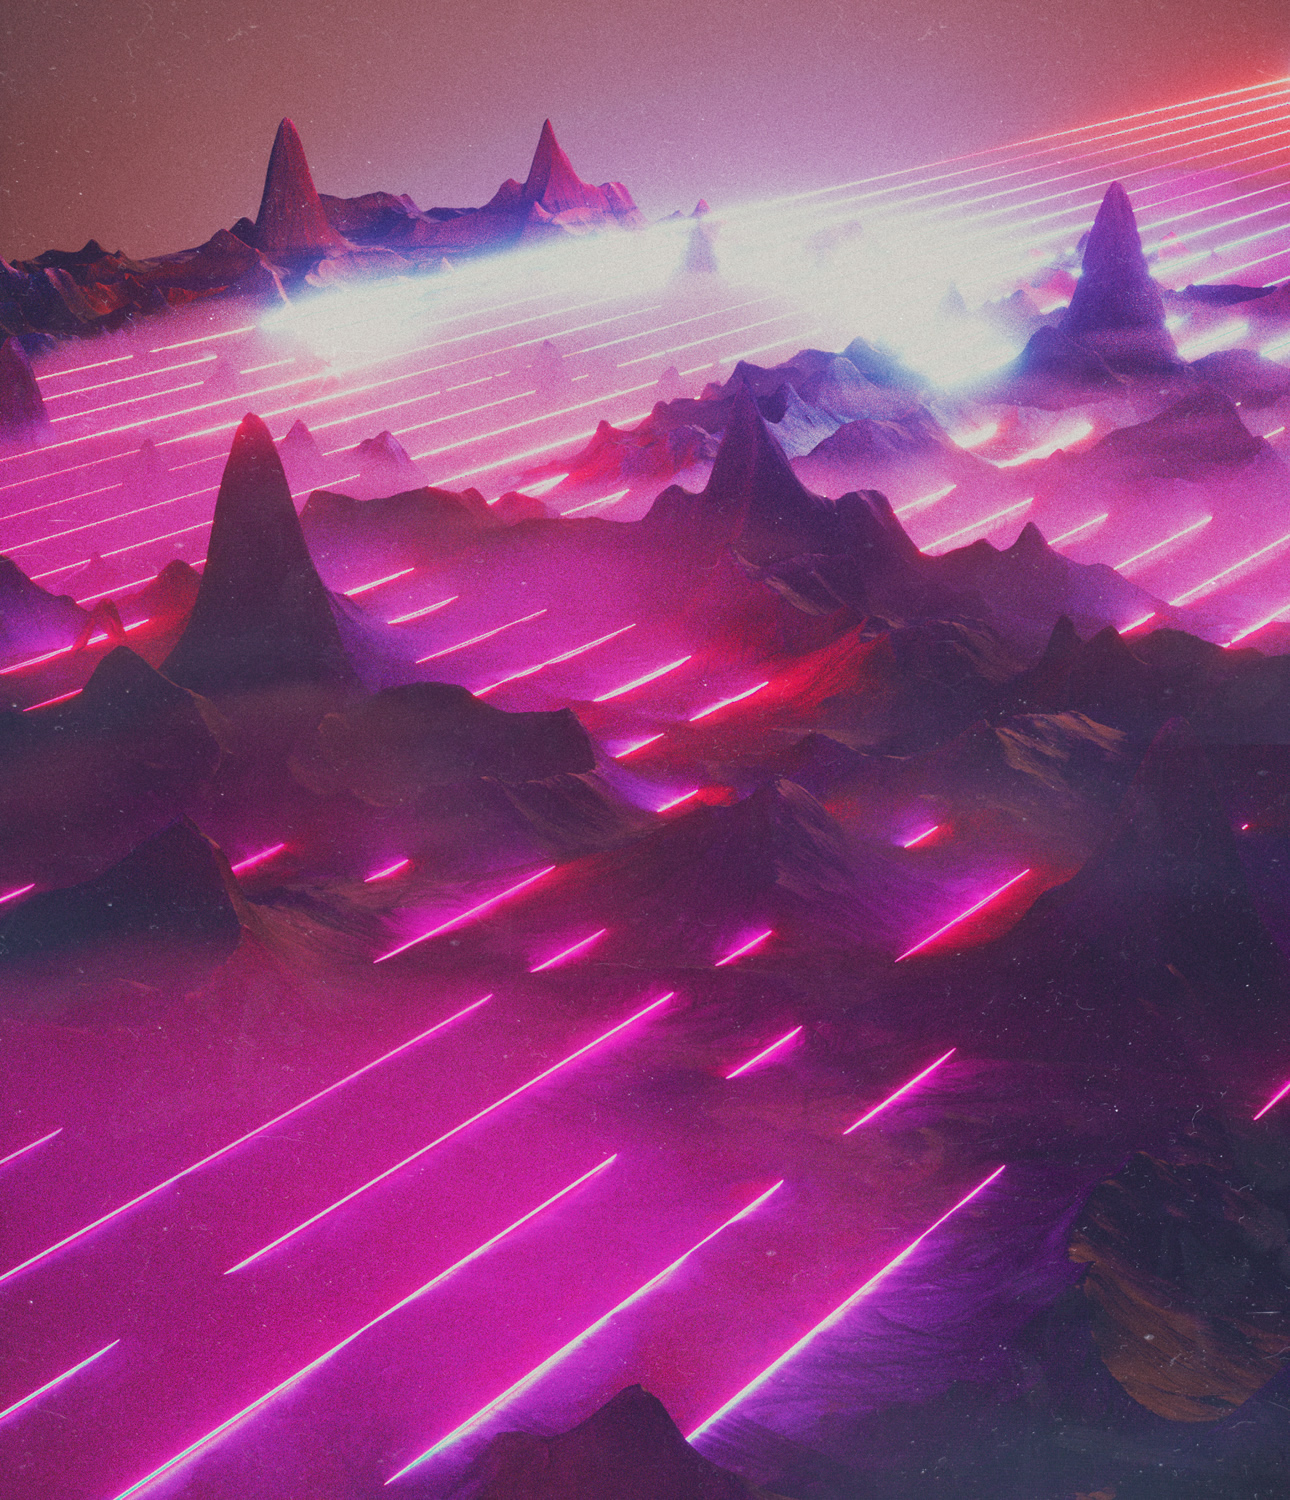 The Unstoppable Beeple with the Everydays Series